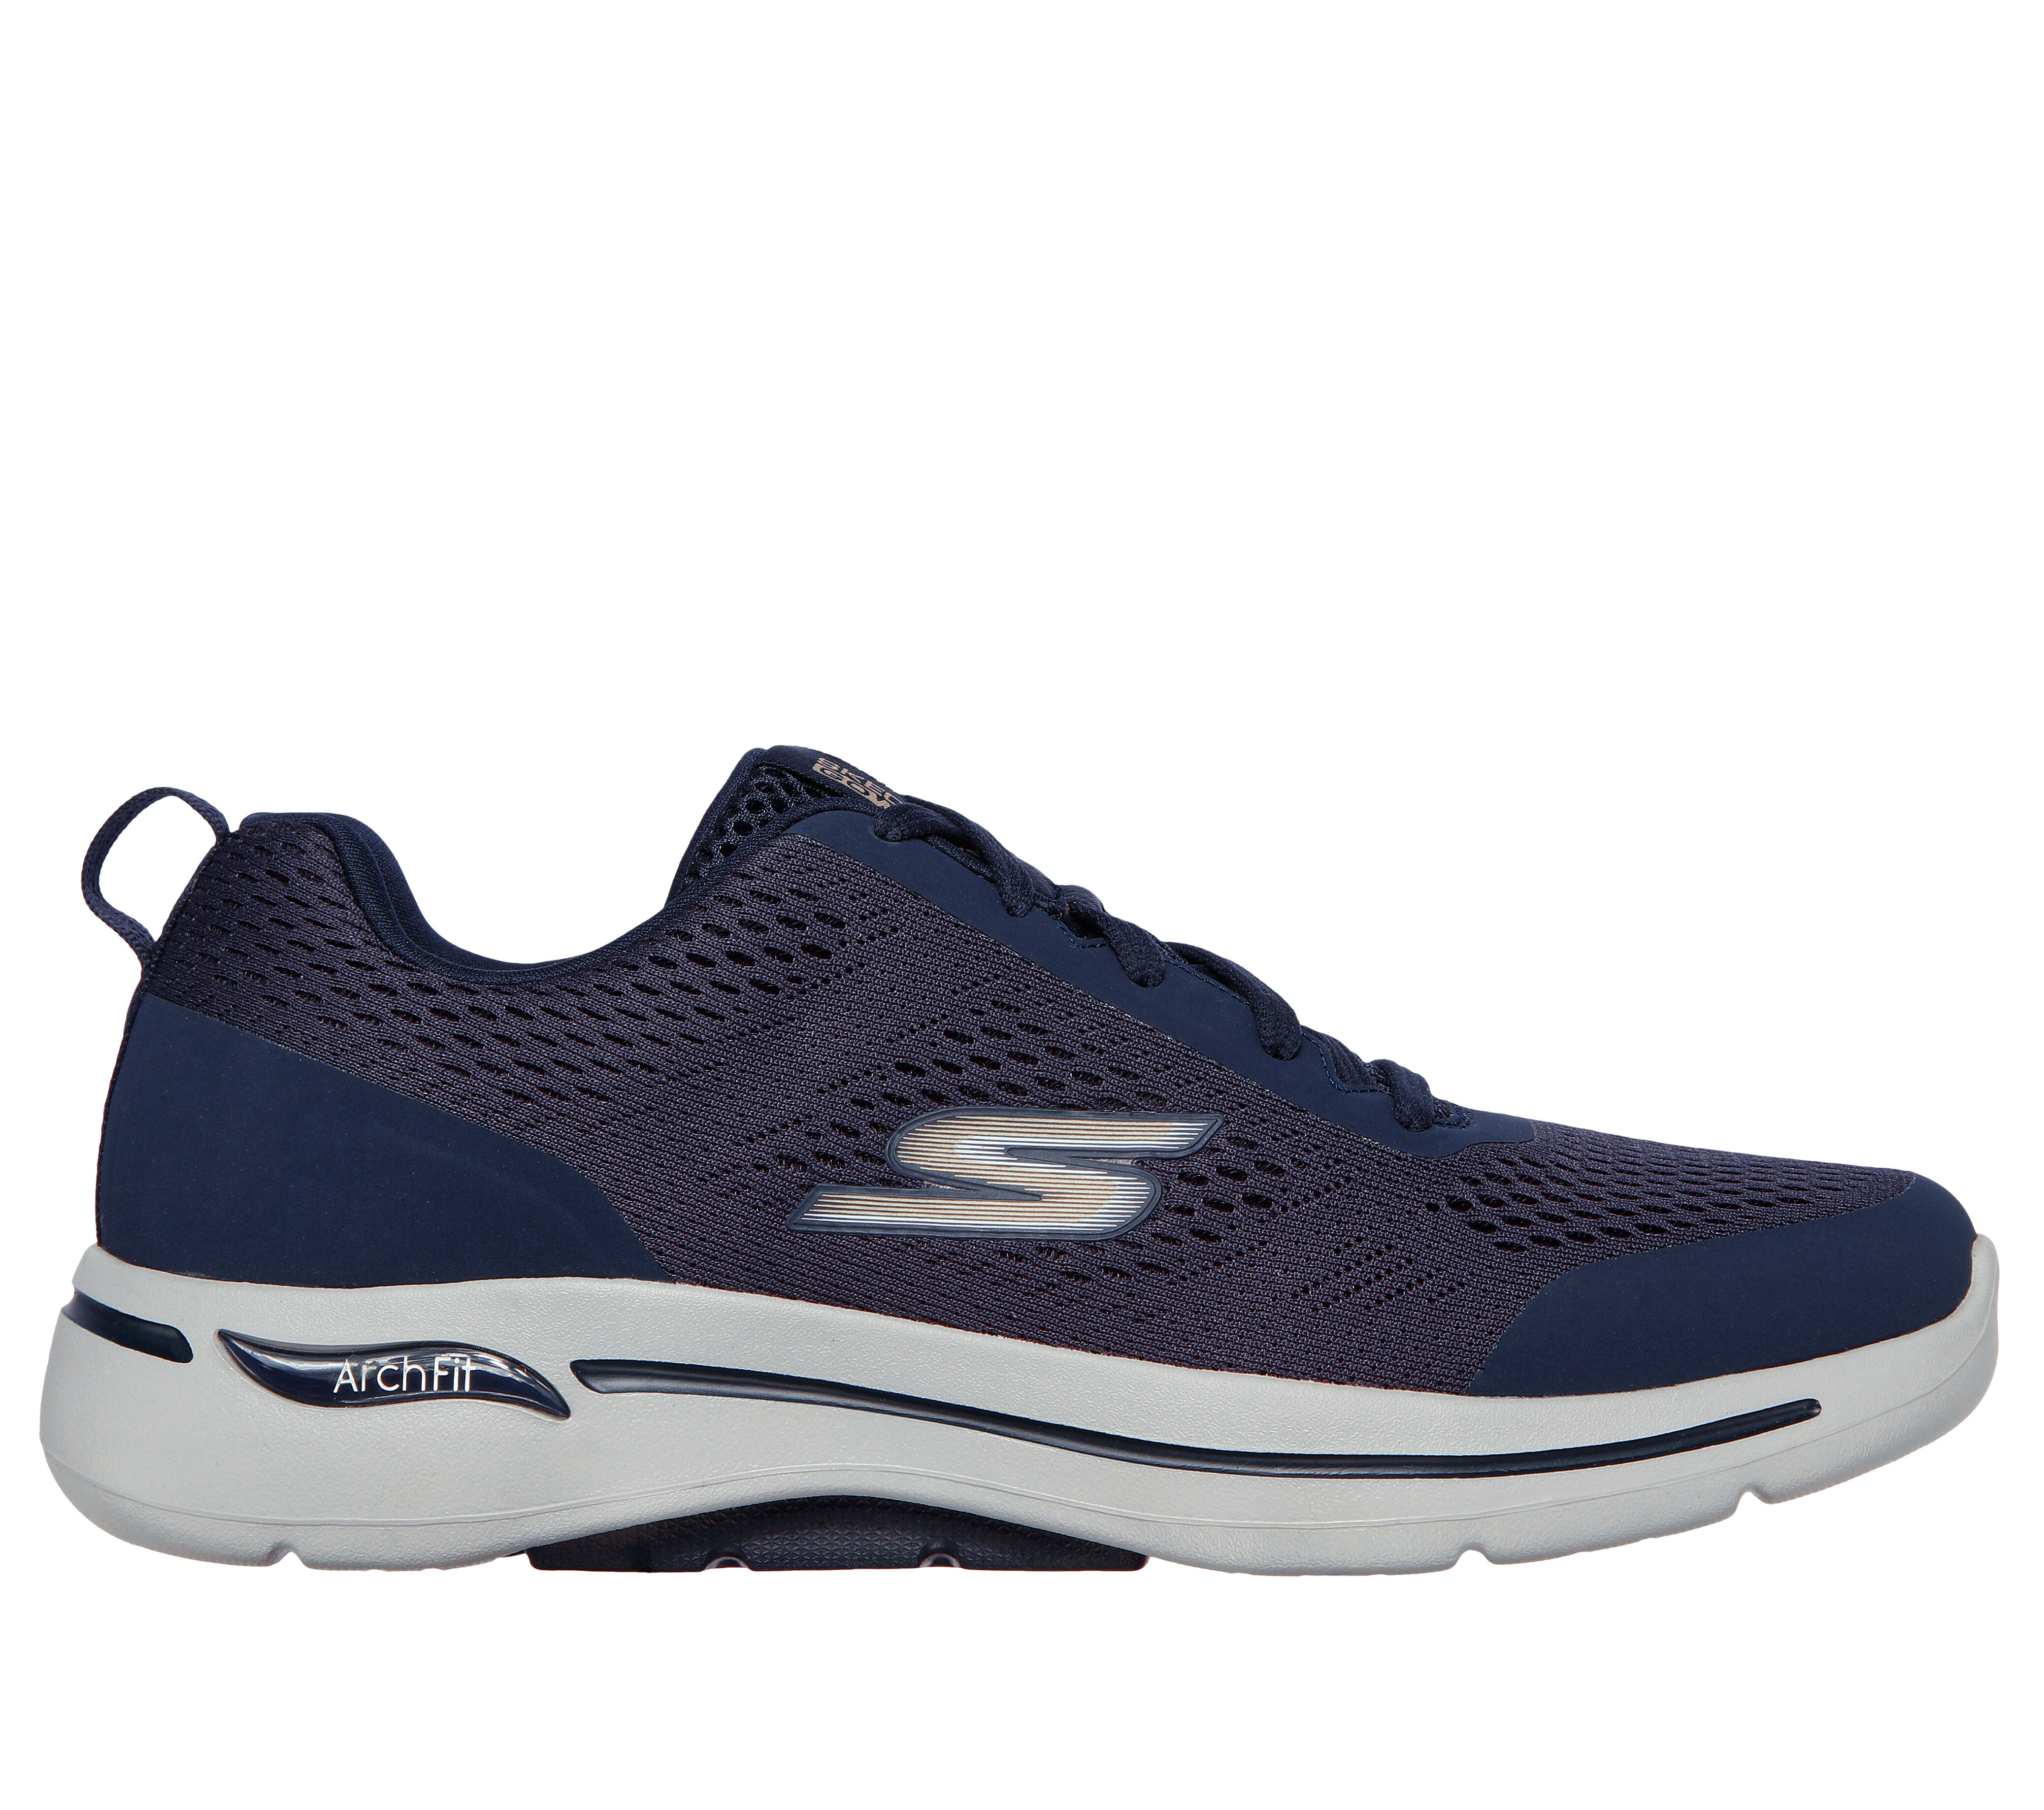 skechers relaxed fit shoes wide width